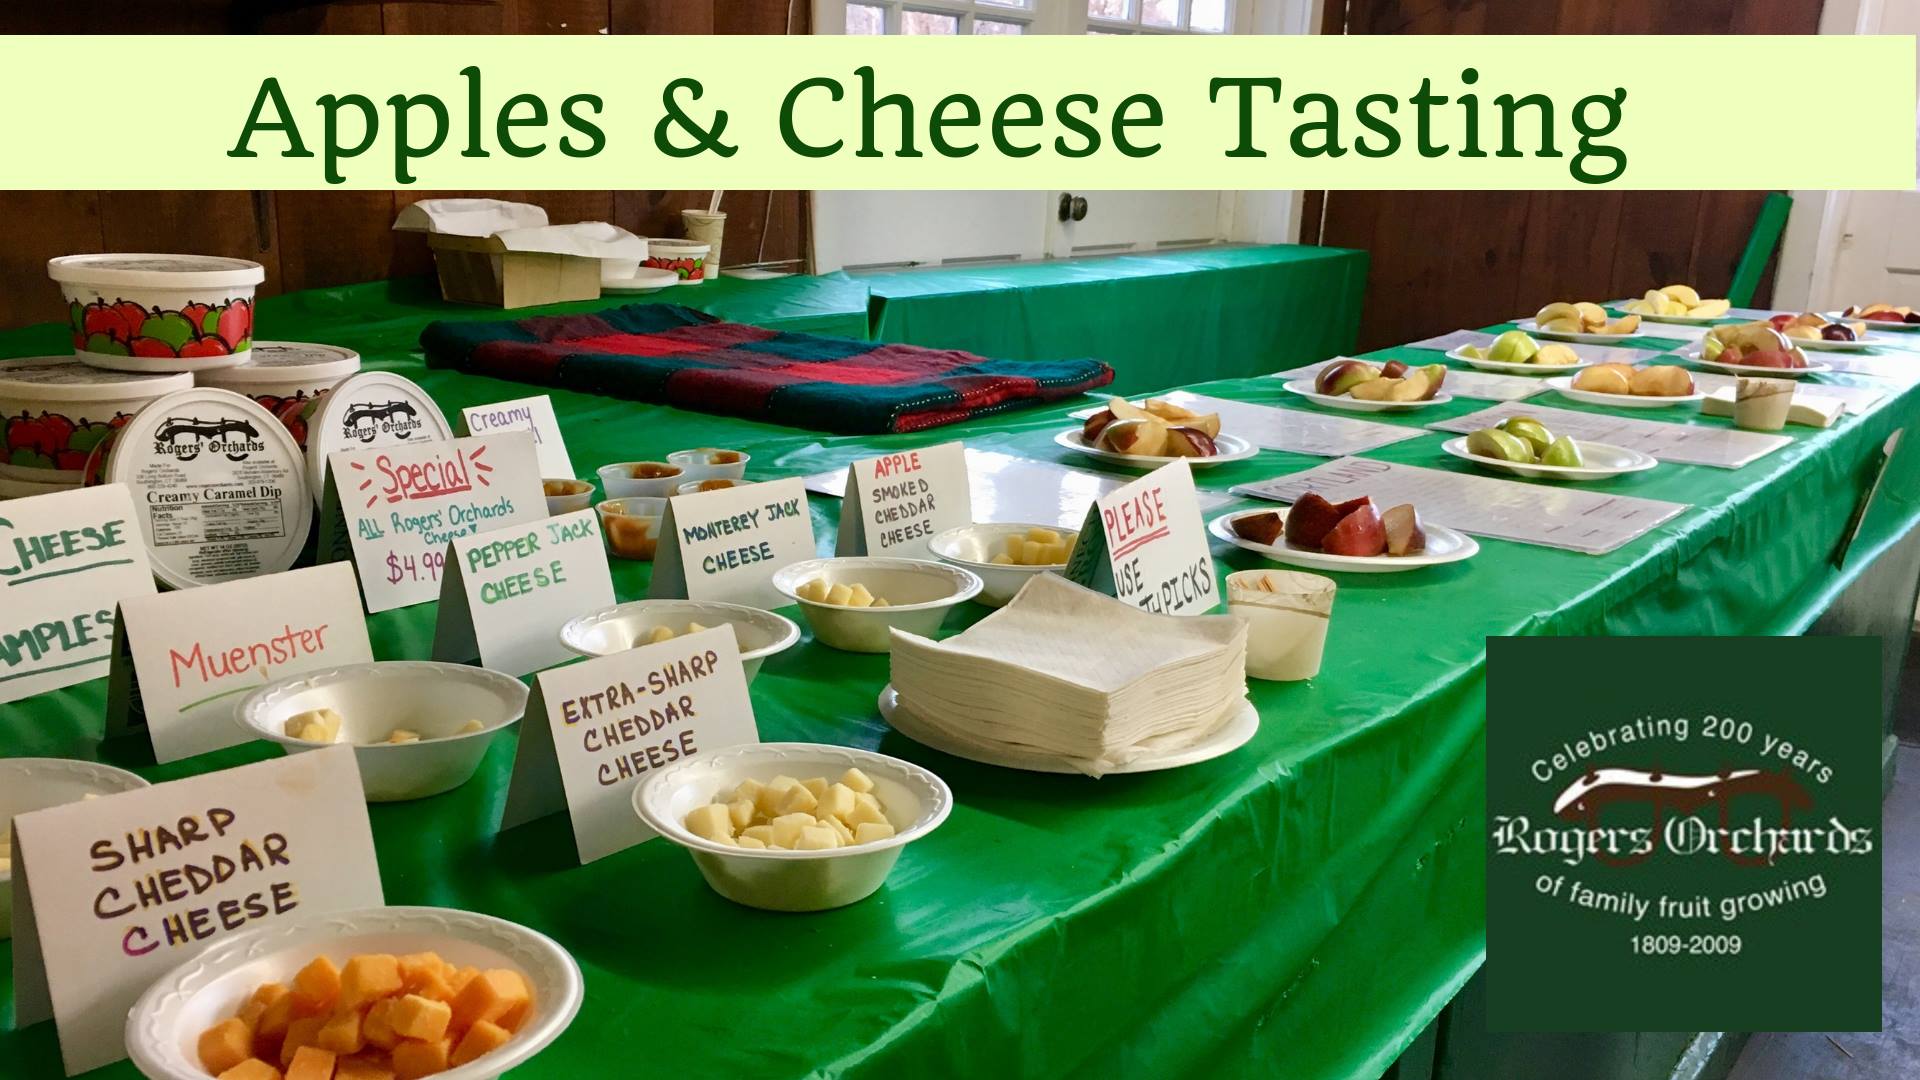 Rogers Orchards Apples & Cheese Tasting